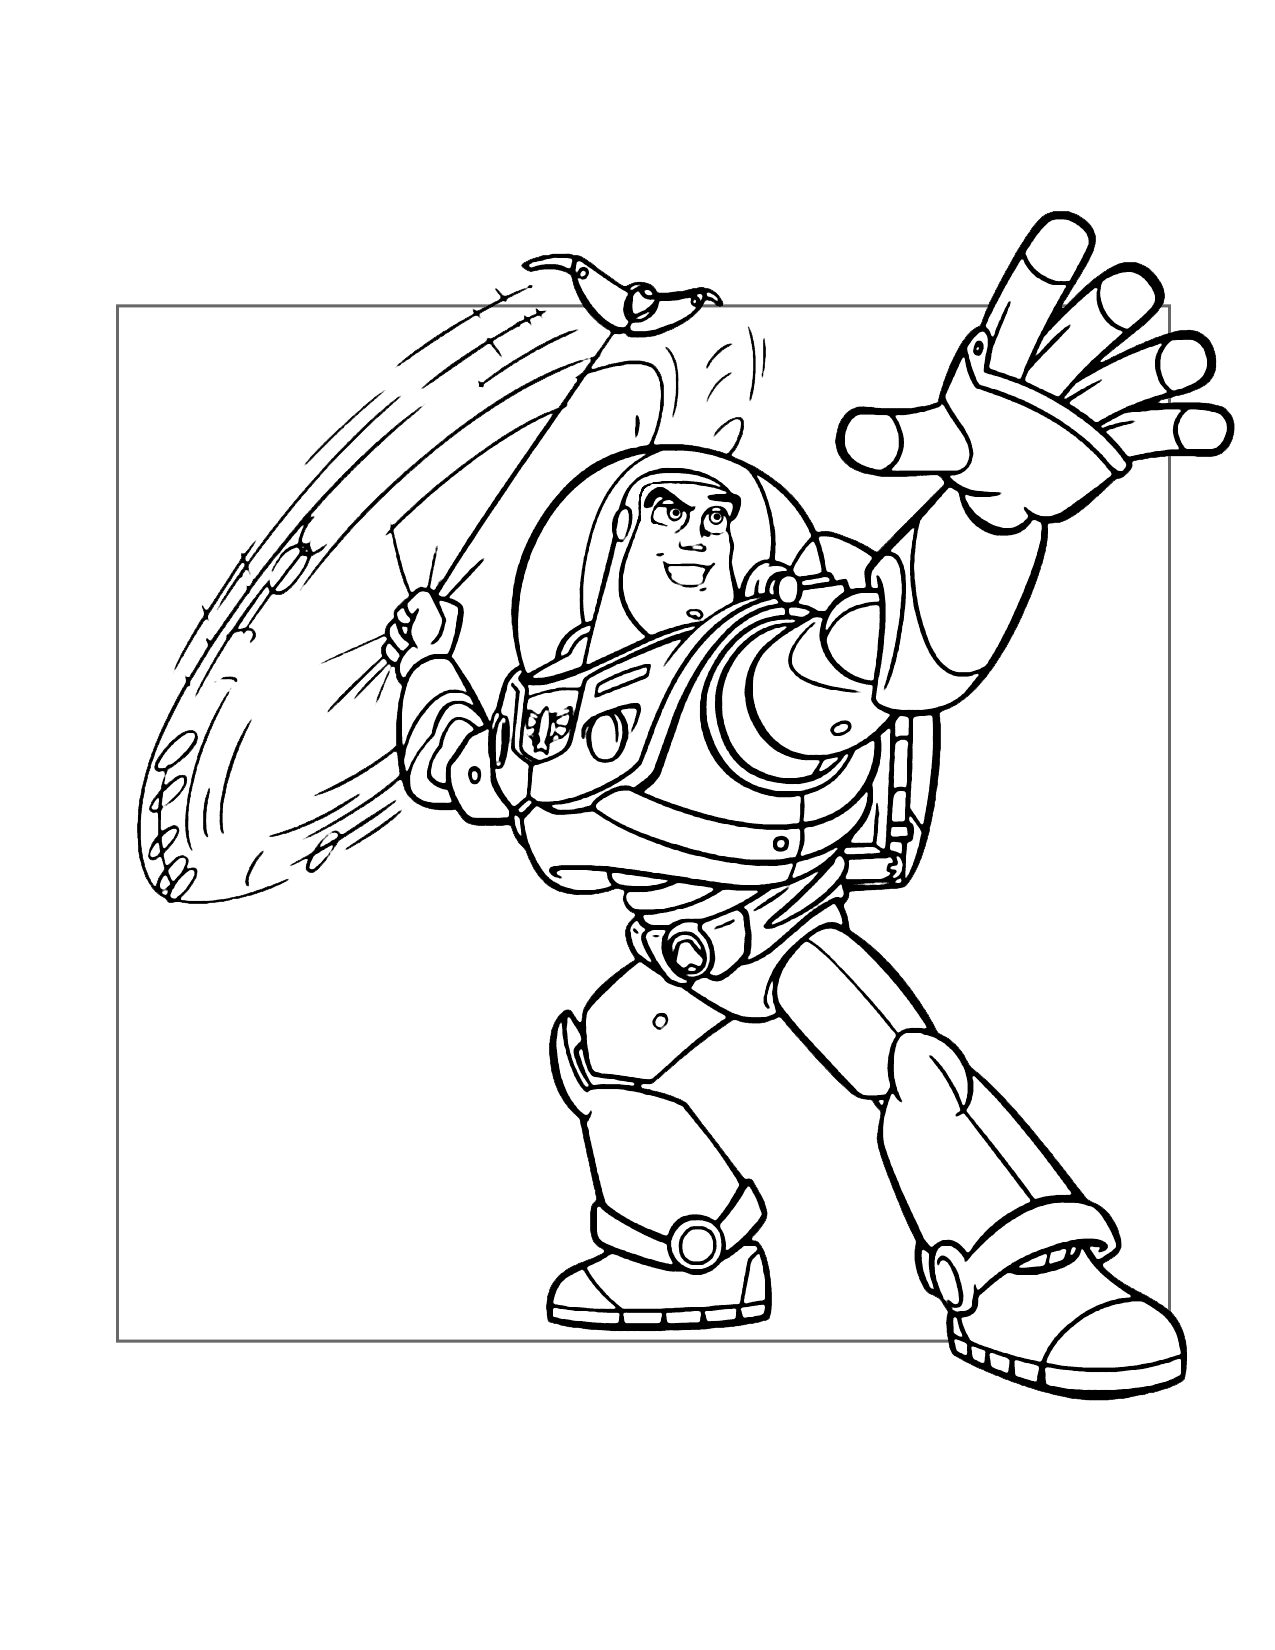 Buzz Lightyear Swinging Boomerang Coloring Page